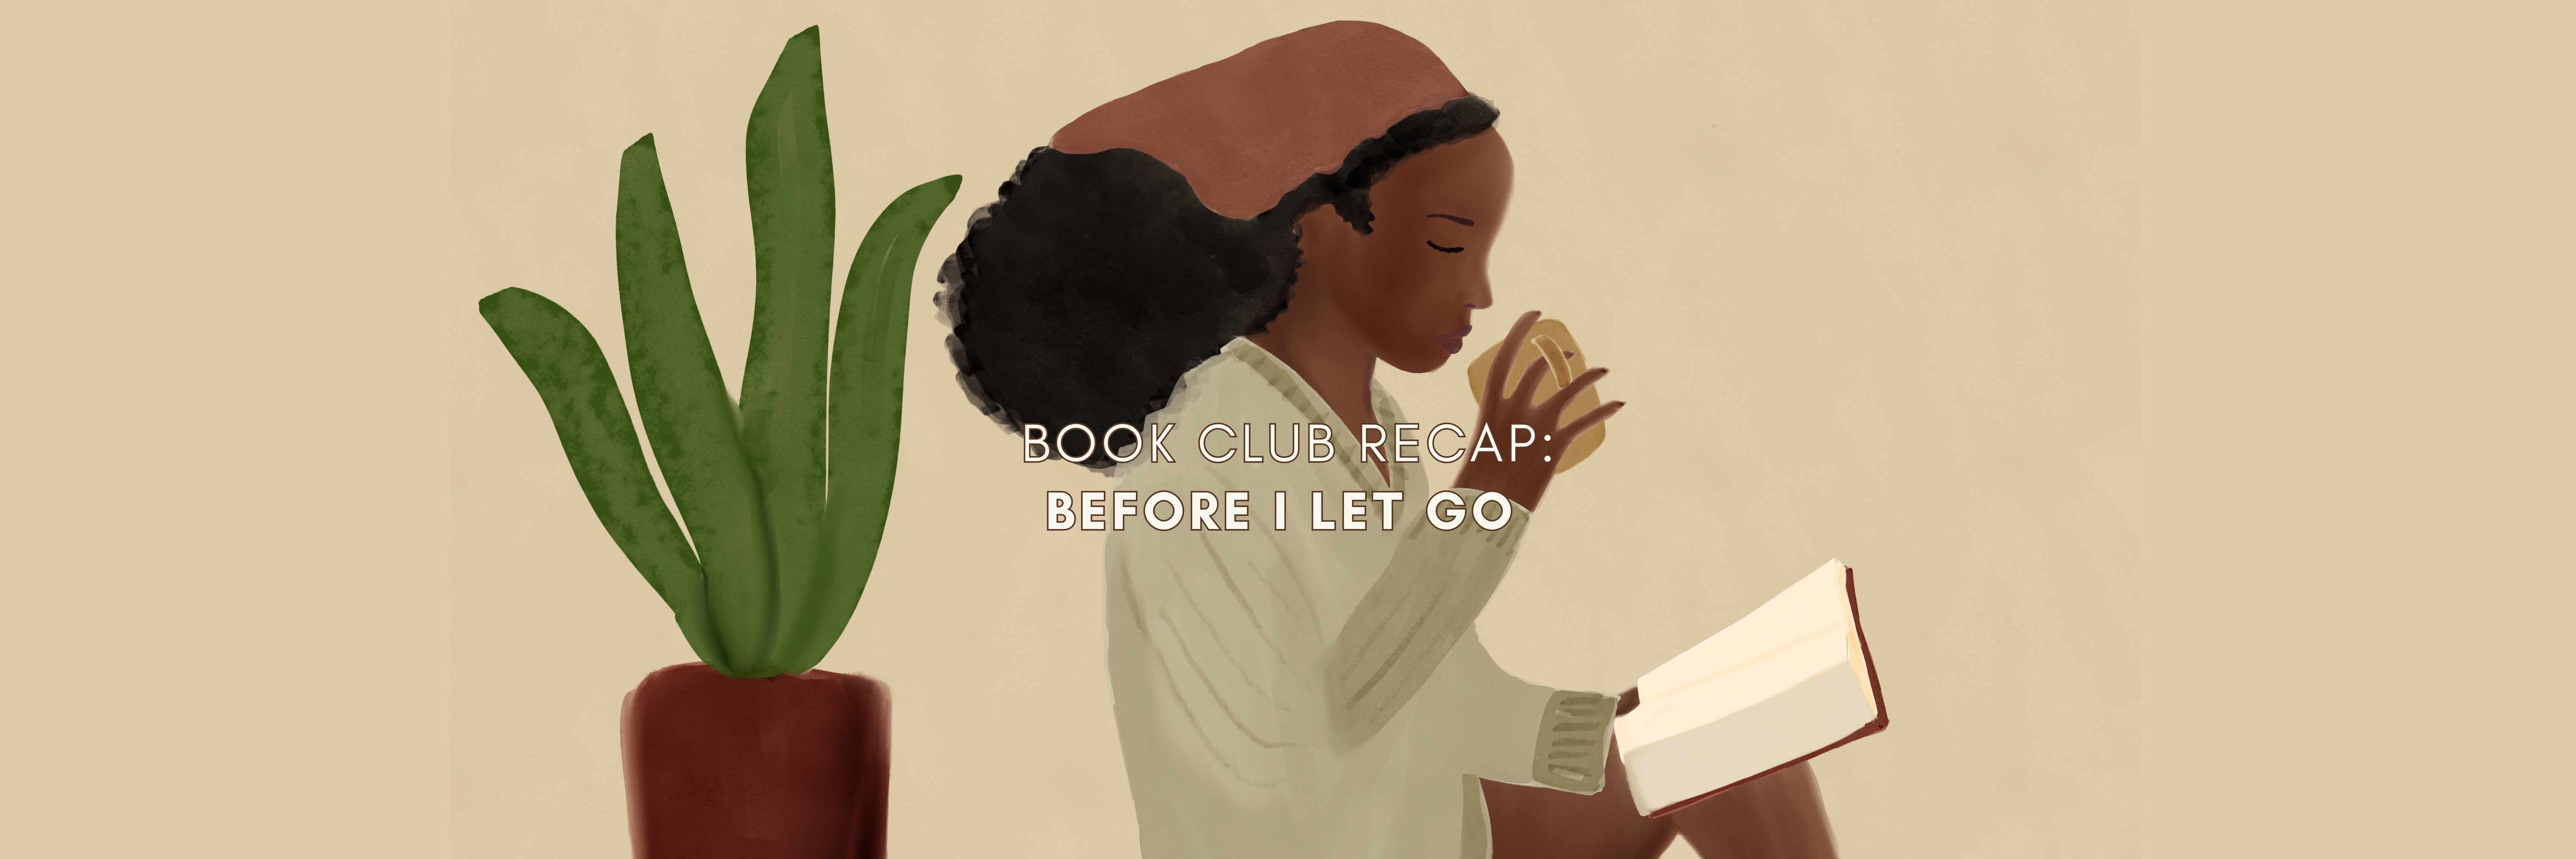 Book Club Recap - Before I Let Go: Love, Loss, and Reconnection